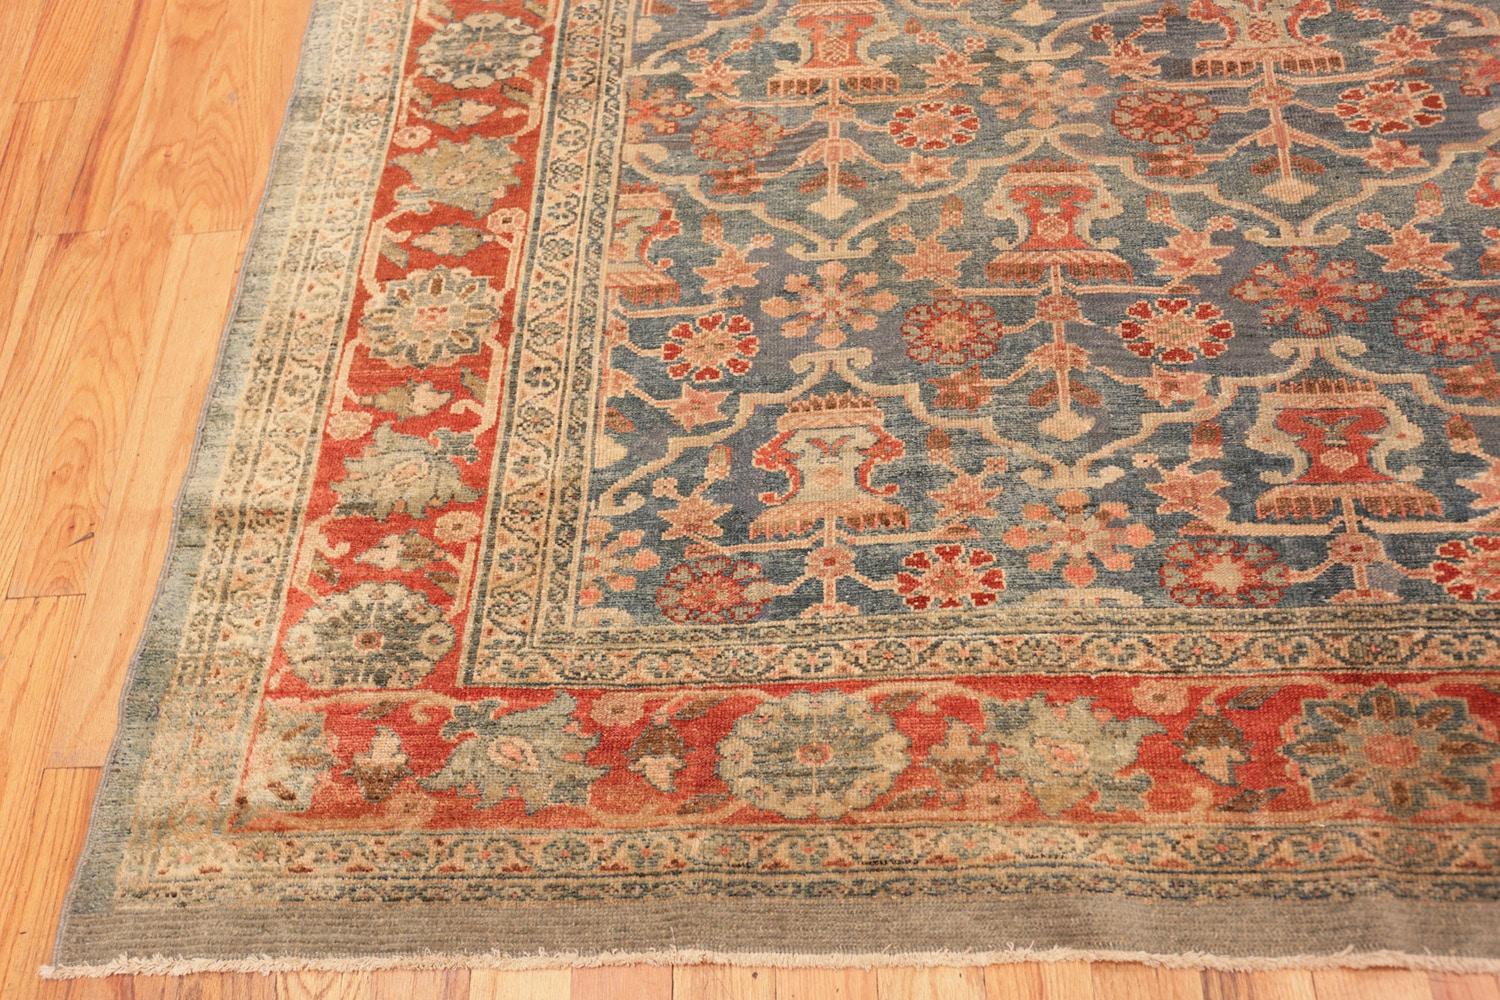 Wool Antique Persian Bibikabad Rug. 7 ft 6 in x 10 ft (2.29 m x 3.05 m) For Sale